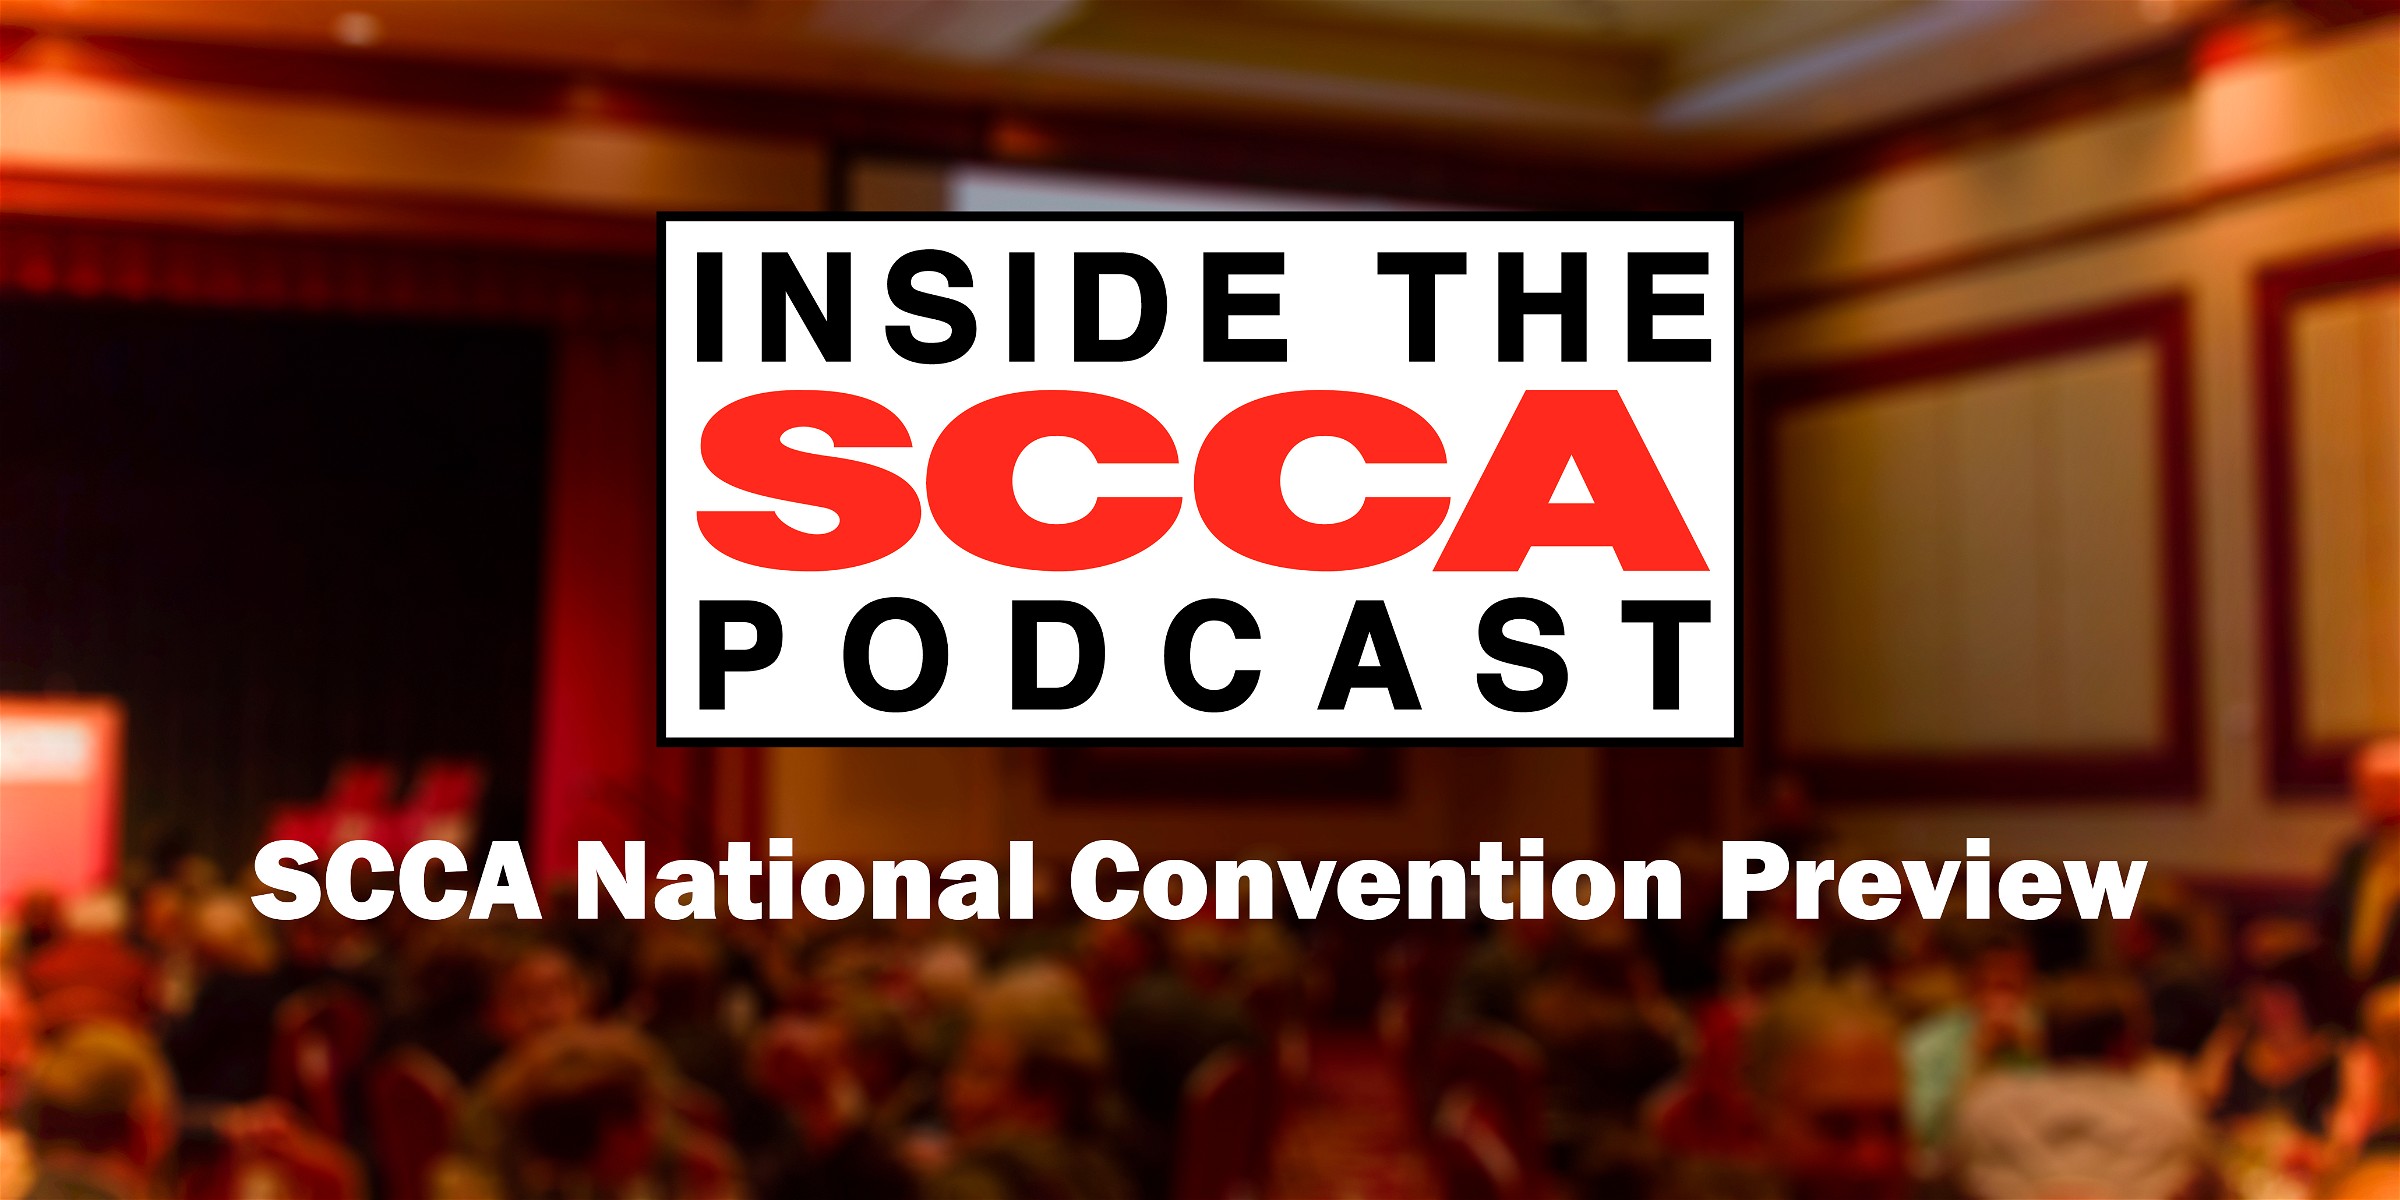 Inside the SCCA: SCCA National Convention Preview